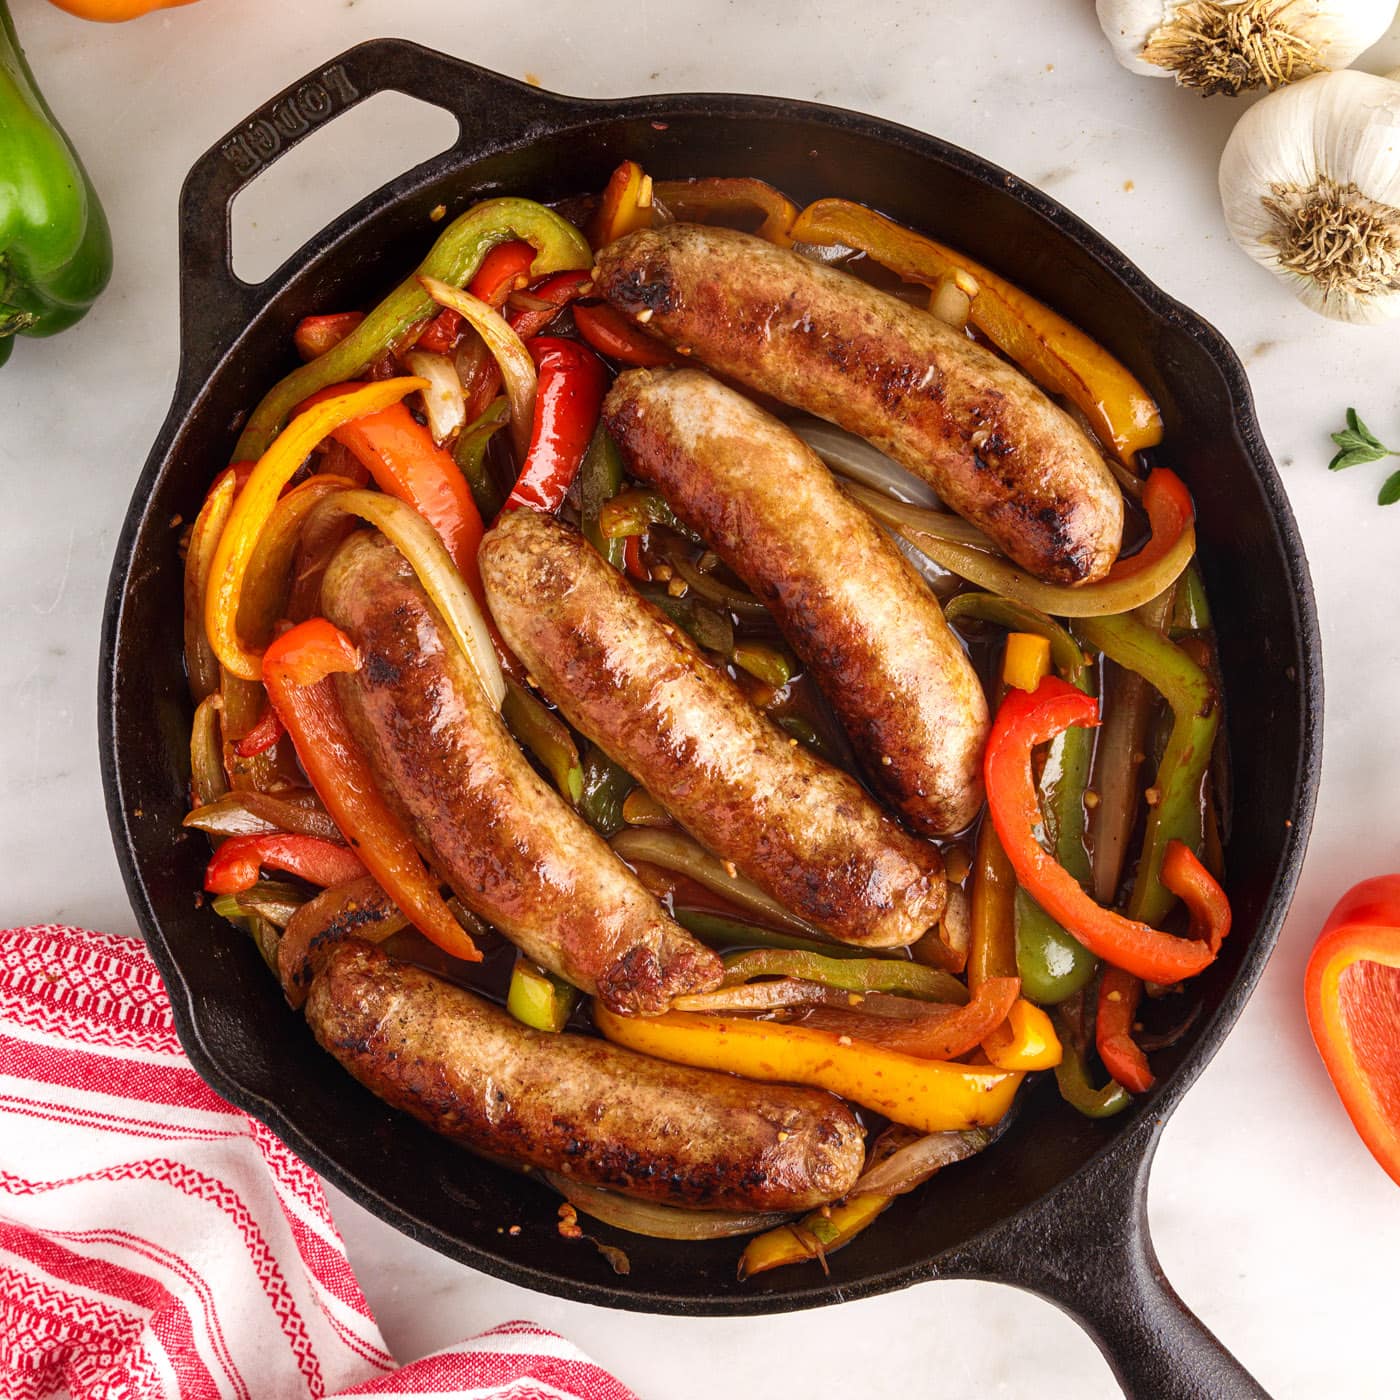 Sausage and Peppers - How to Grill Sausage and Peppers